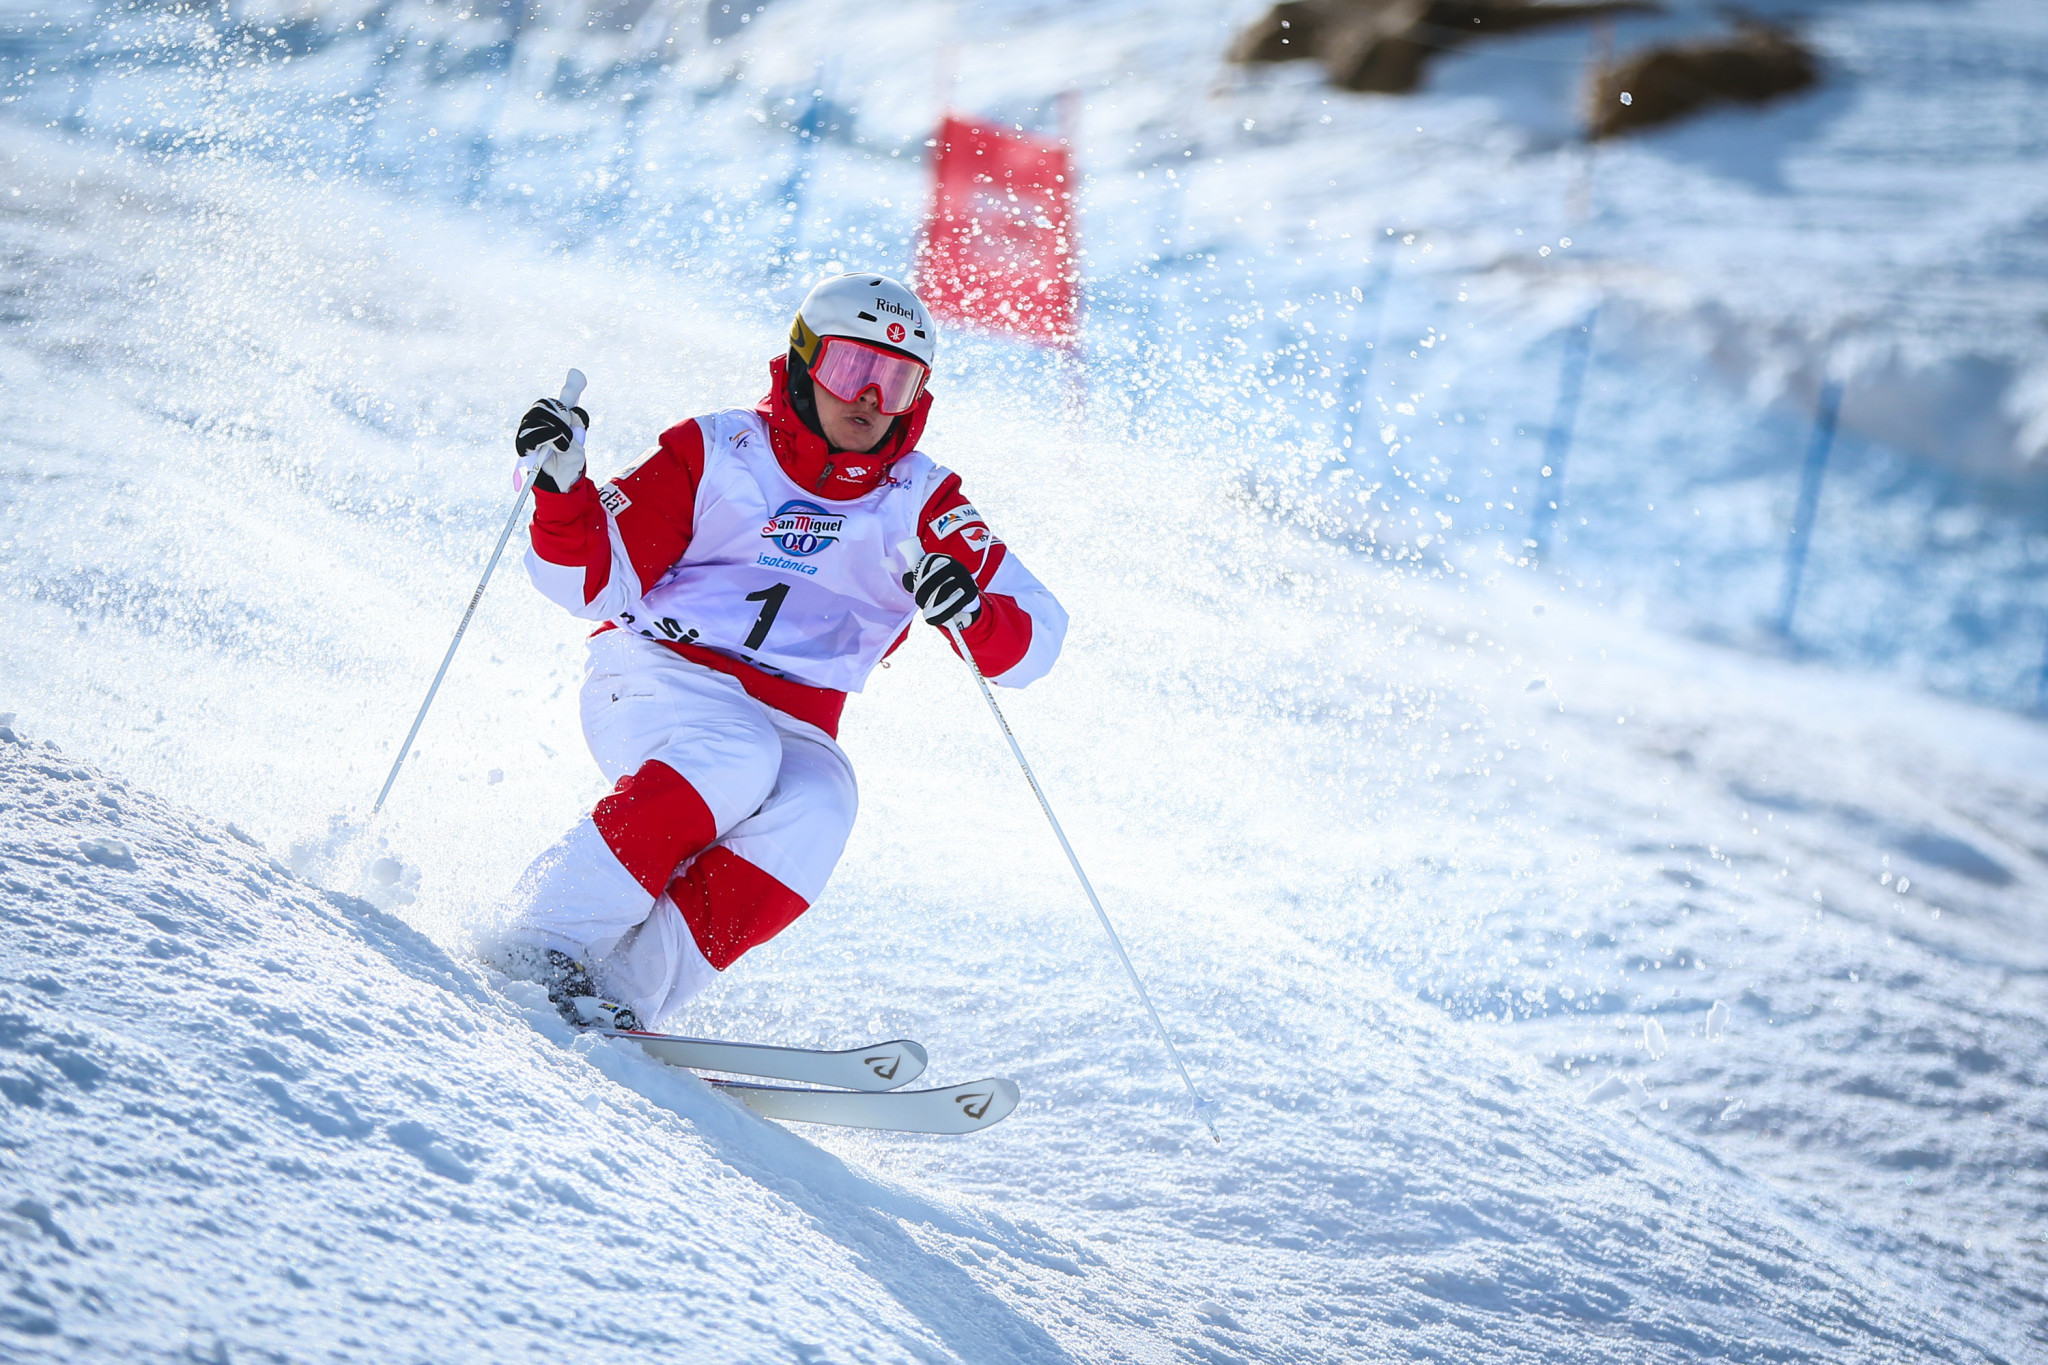 Canada's Mikael Kingsbury came out on top at the Moguls World Cup in Ruka earlier this month ©Getty Images